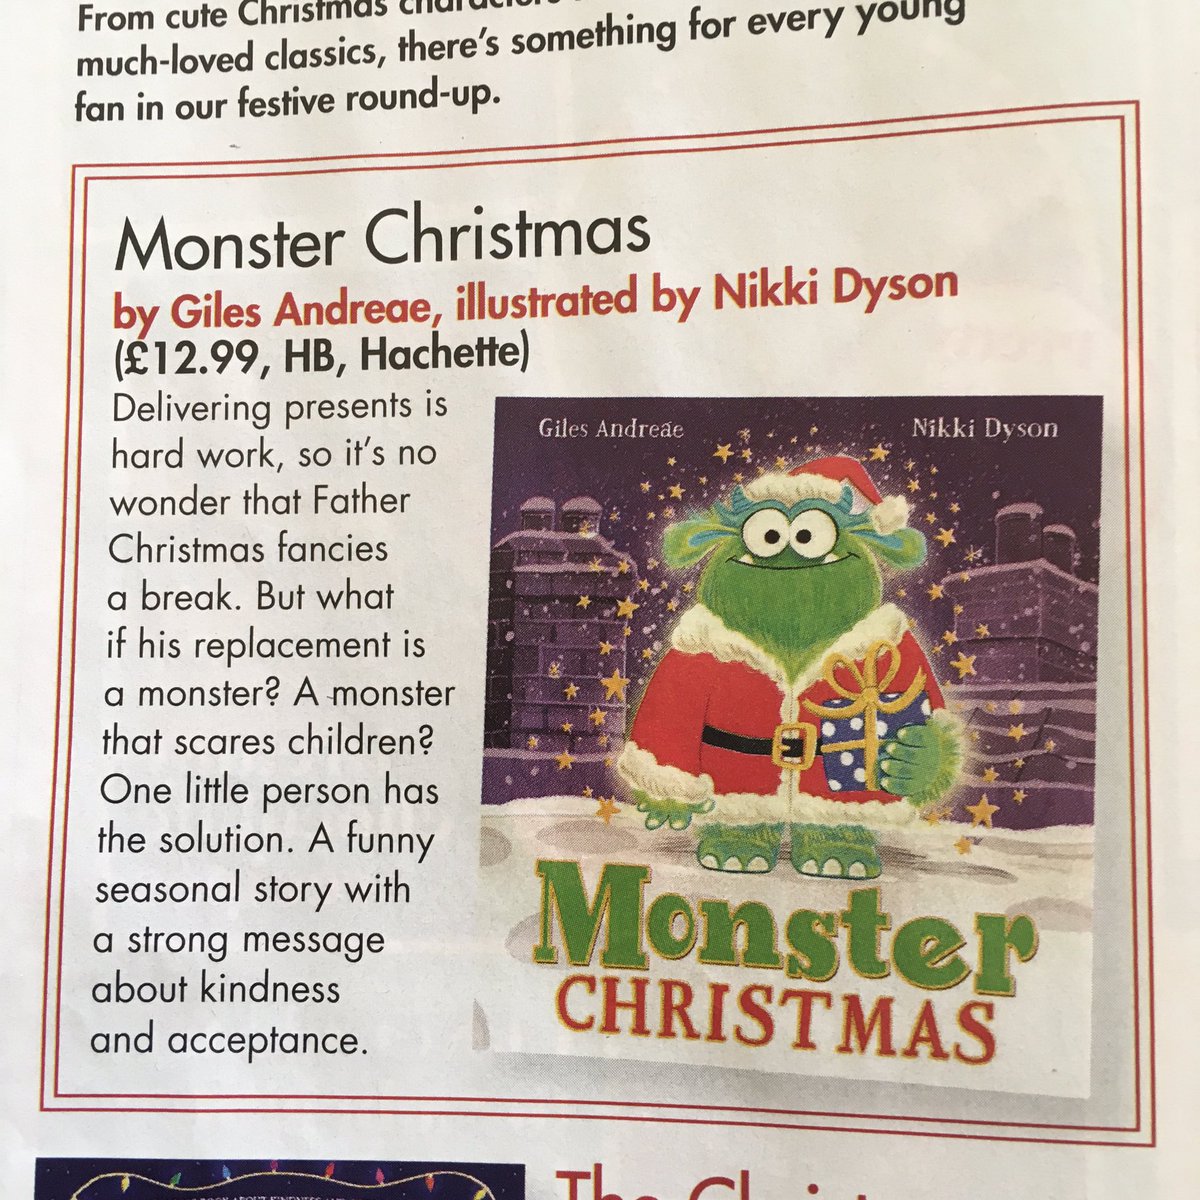 @DoodleDyson from the Christmas edition of #WomansWeekly 😊 Review by @zoeannewest (no relation!) 😁